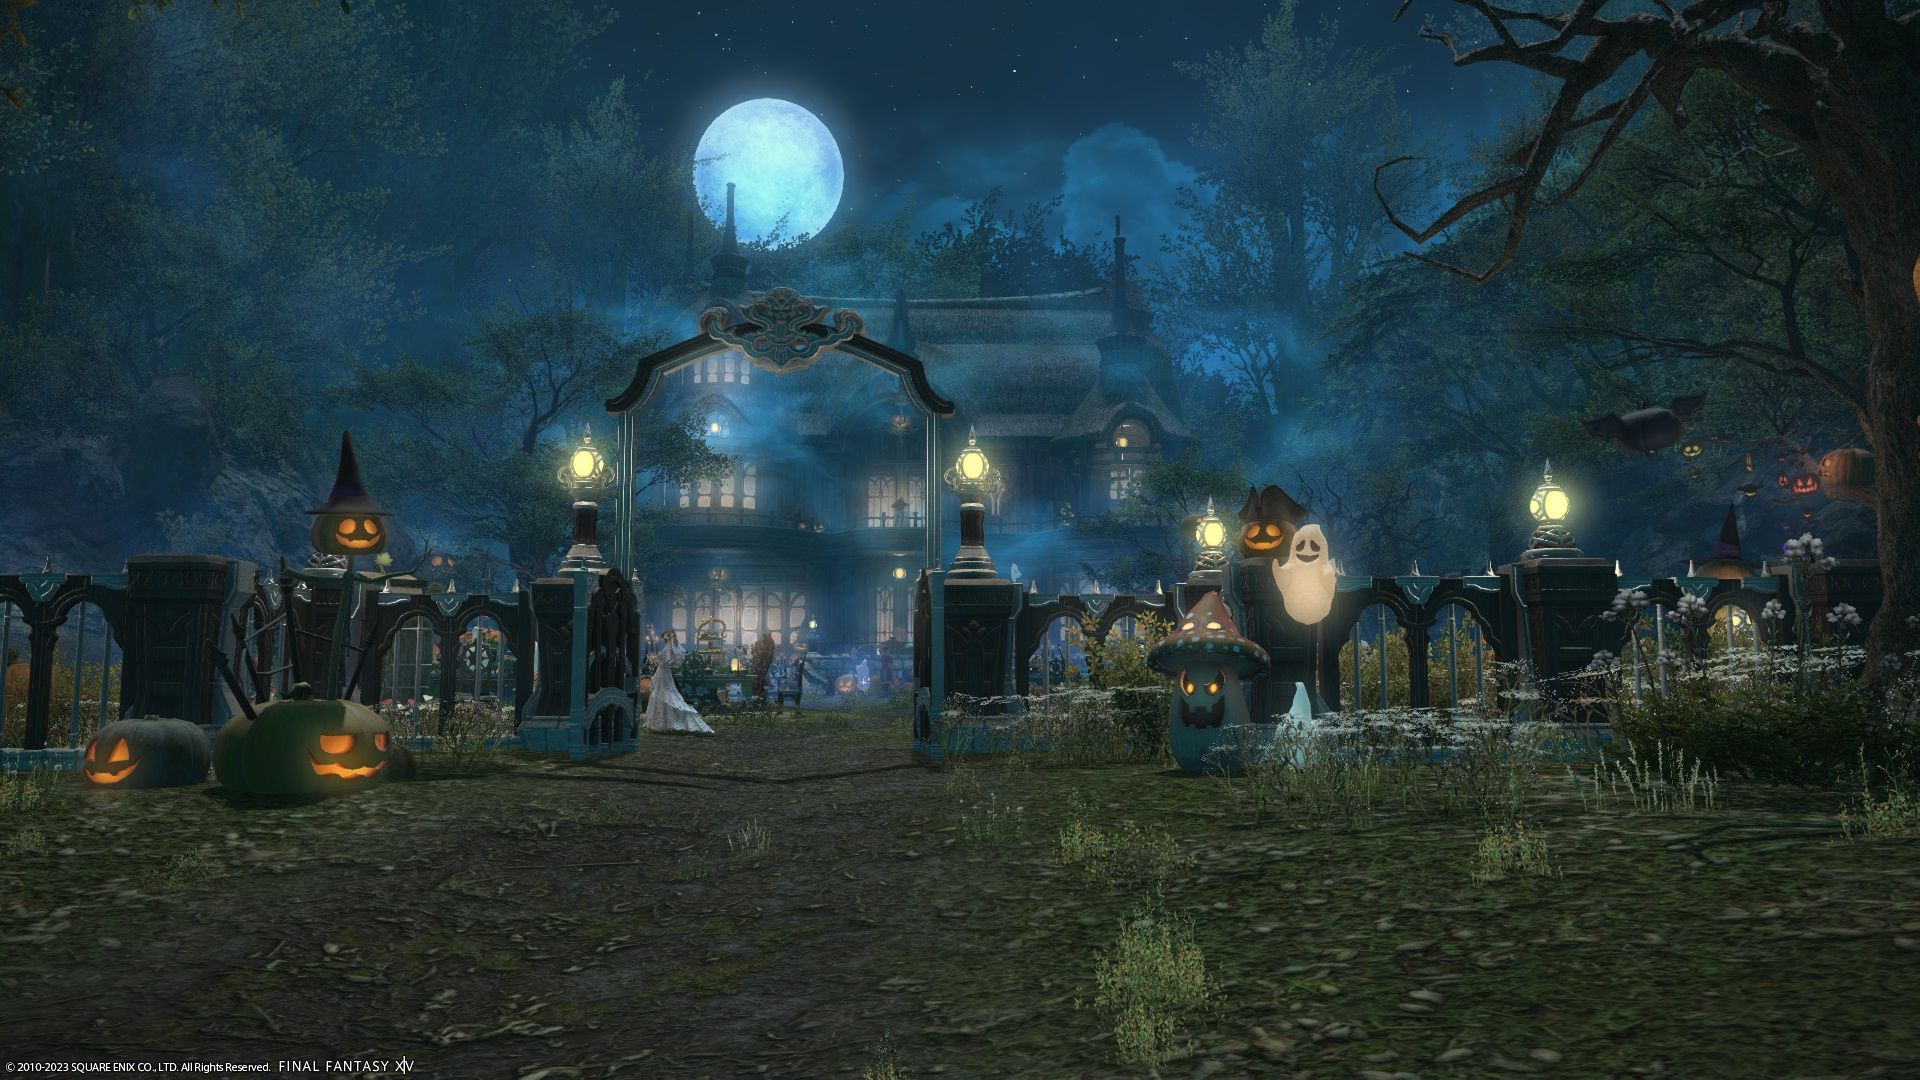 The Sneaky Hollow area in Final Fantasy 14, depicting the manor house.